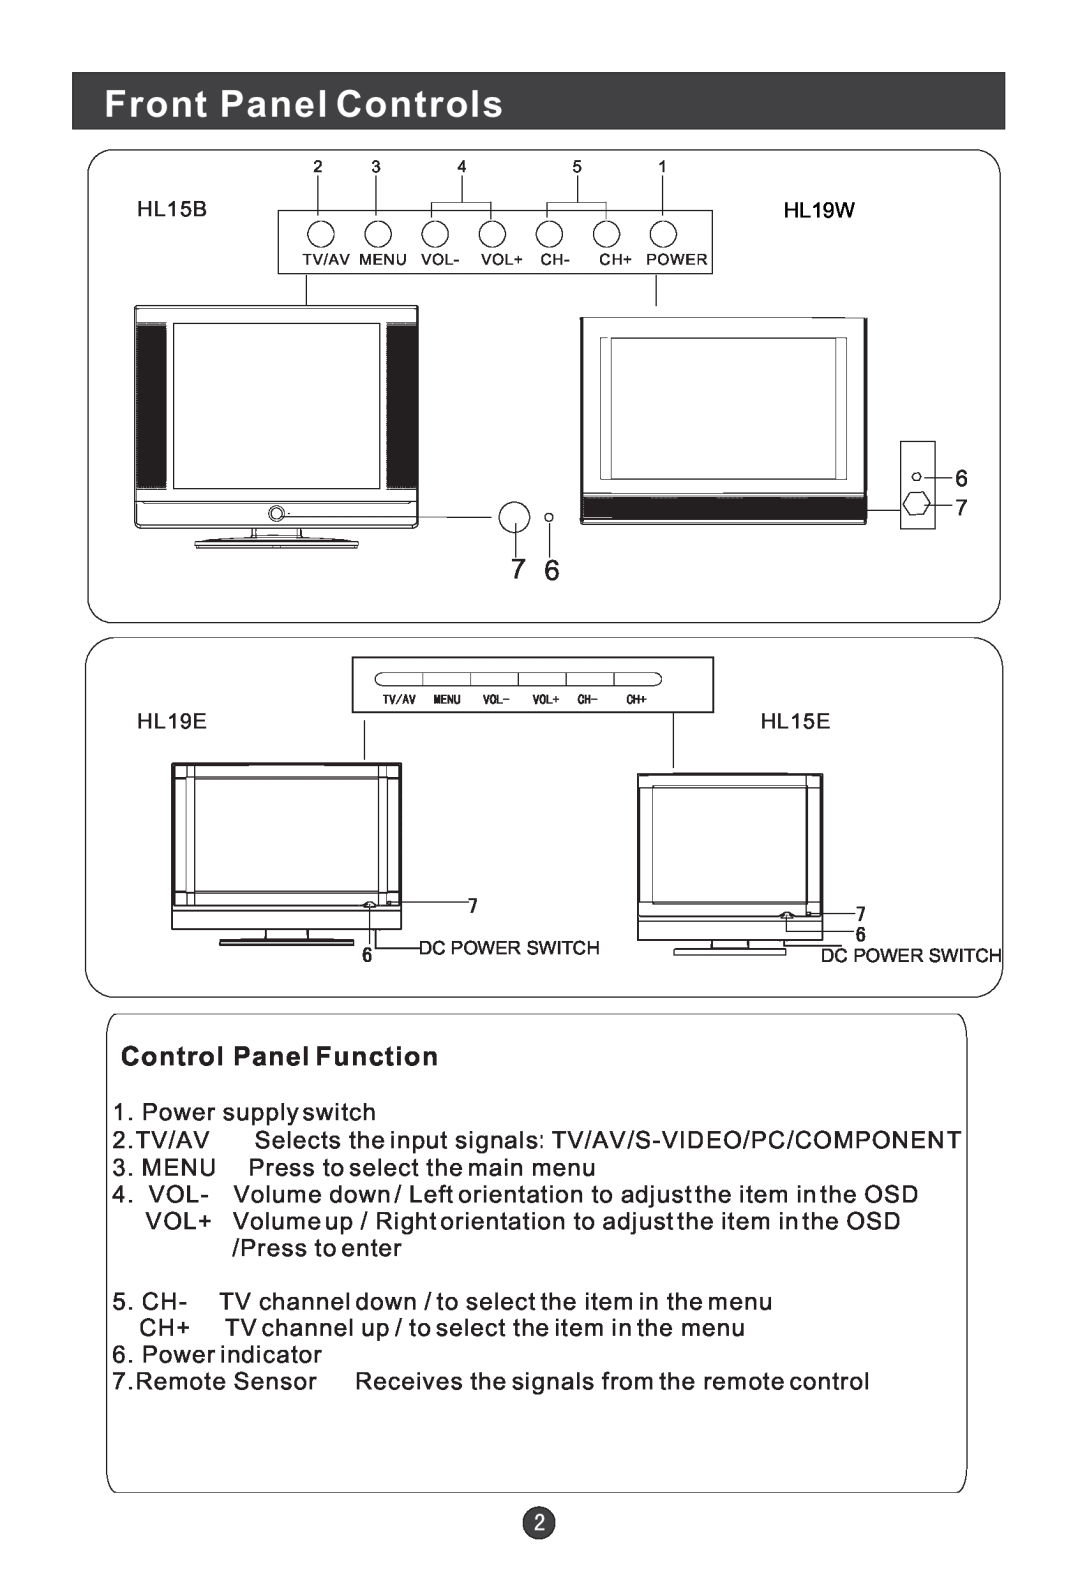 Haier HL15B user manual Front Panel Controls, Control Panel Function 